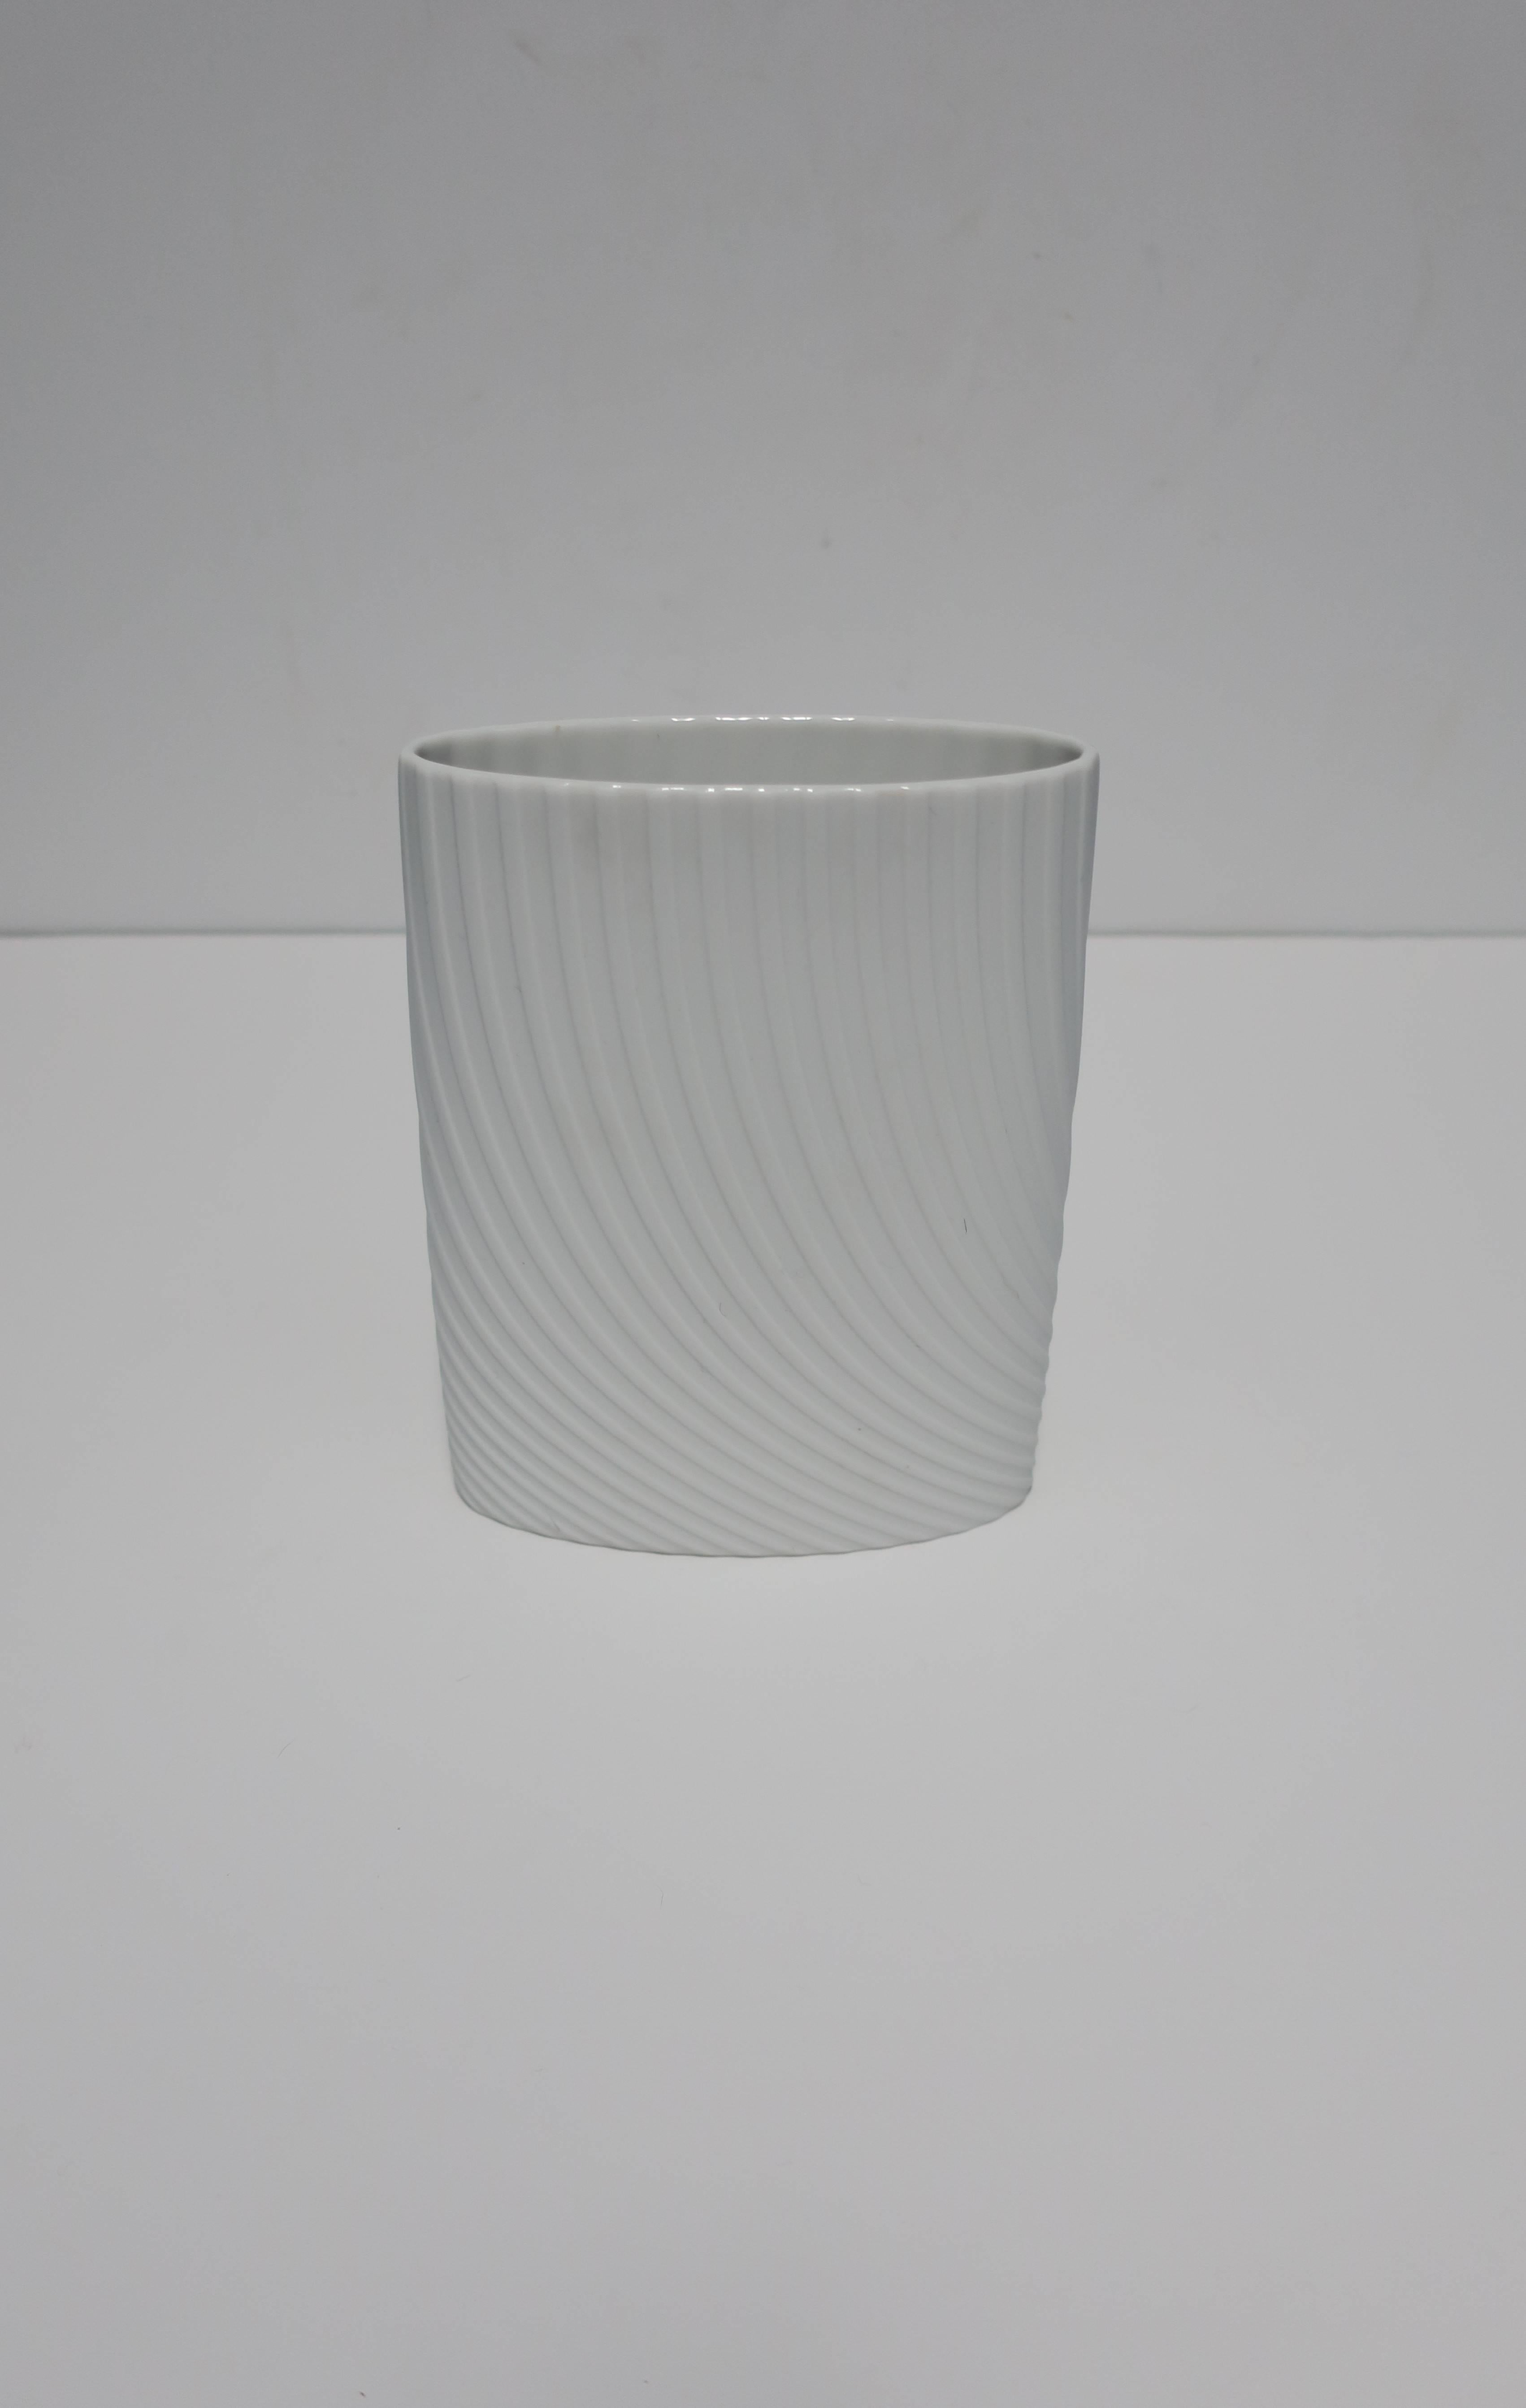 A beautiful German designer oval white matte porcelain ceramic pottery vase by Rosenthal 'Studio-Line', Germany. With marker's mark's and designer signature on bottom as show in image #10. Beautiful with or without flowers. 

Measurements include: